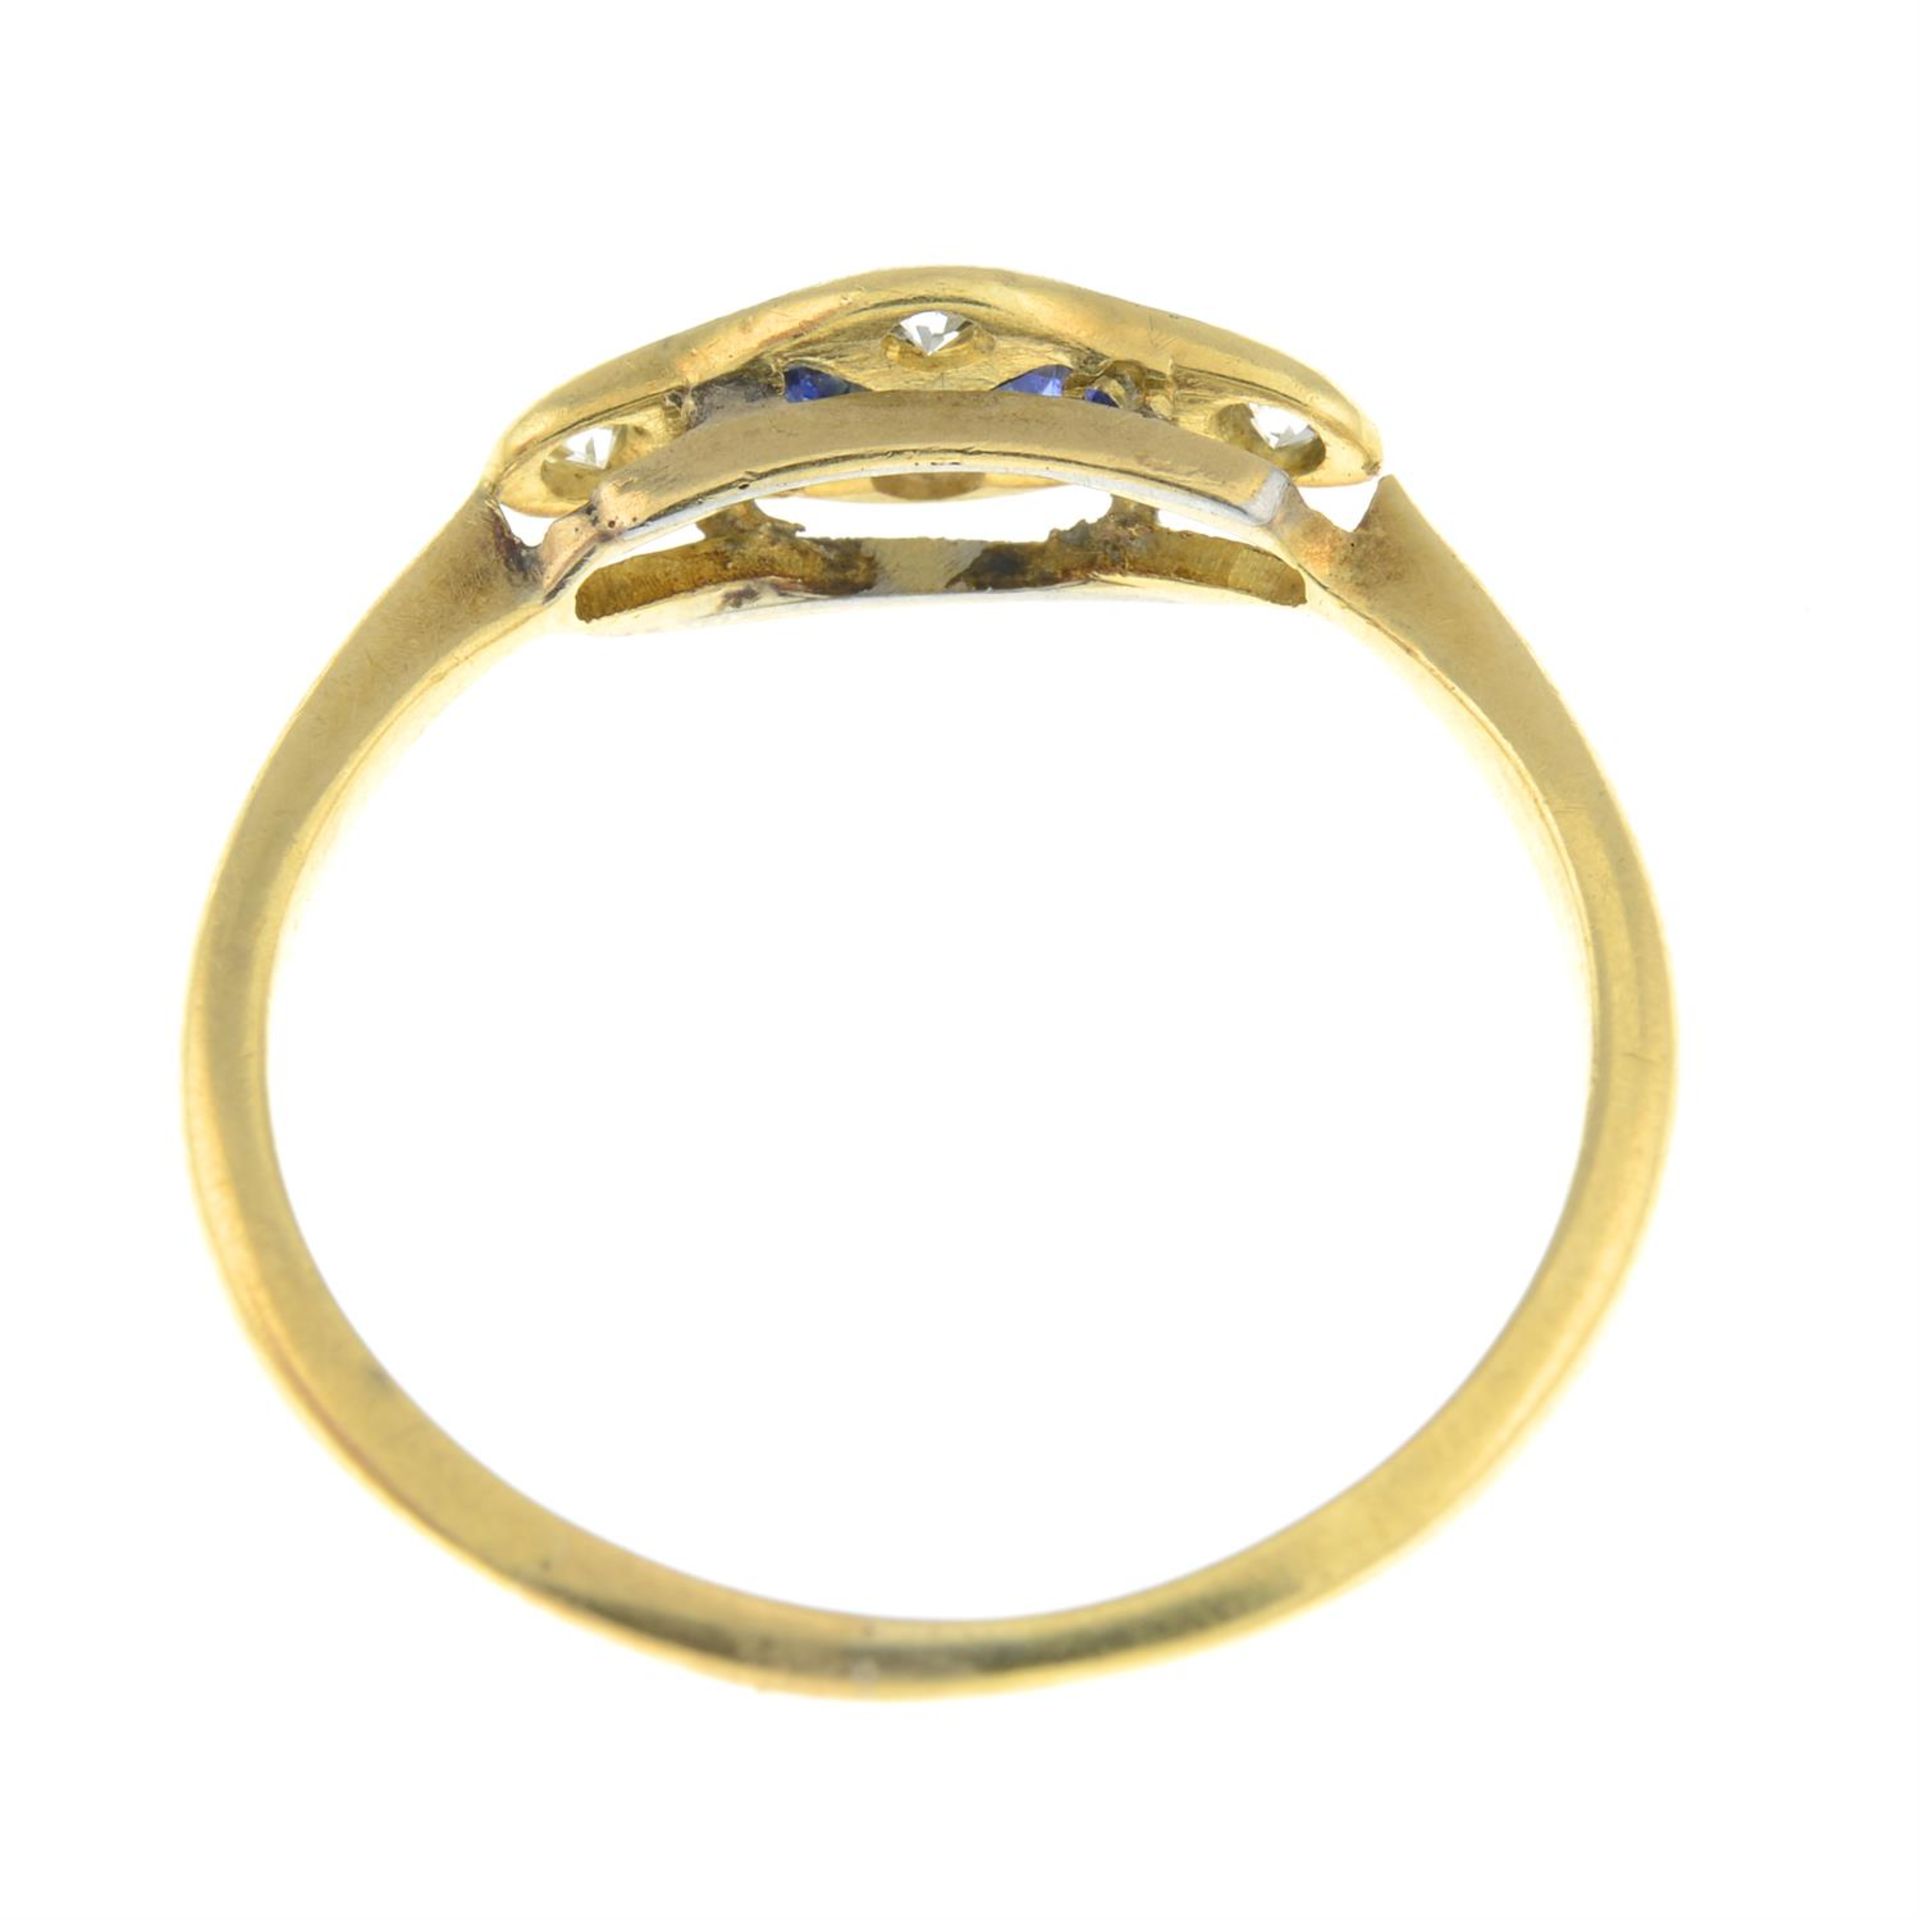 An early 20th century 18ct gold and platinum sapphire and single-cut diamond ring. - Image 2 of 2